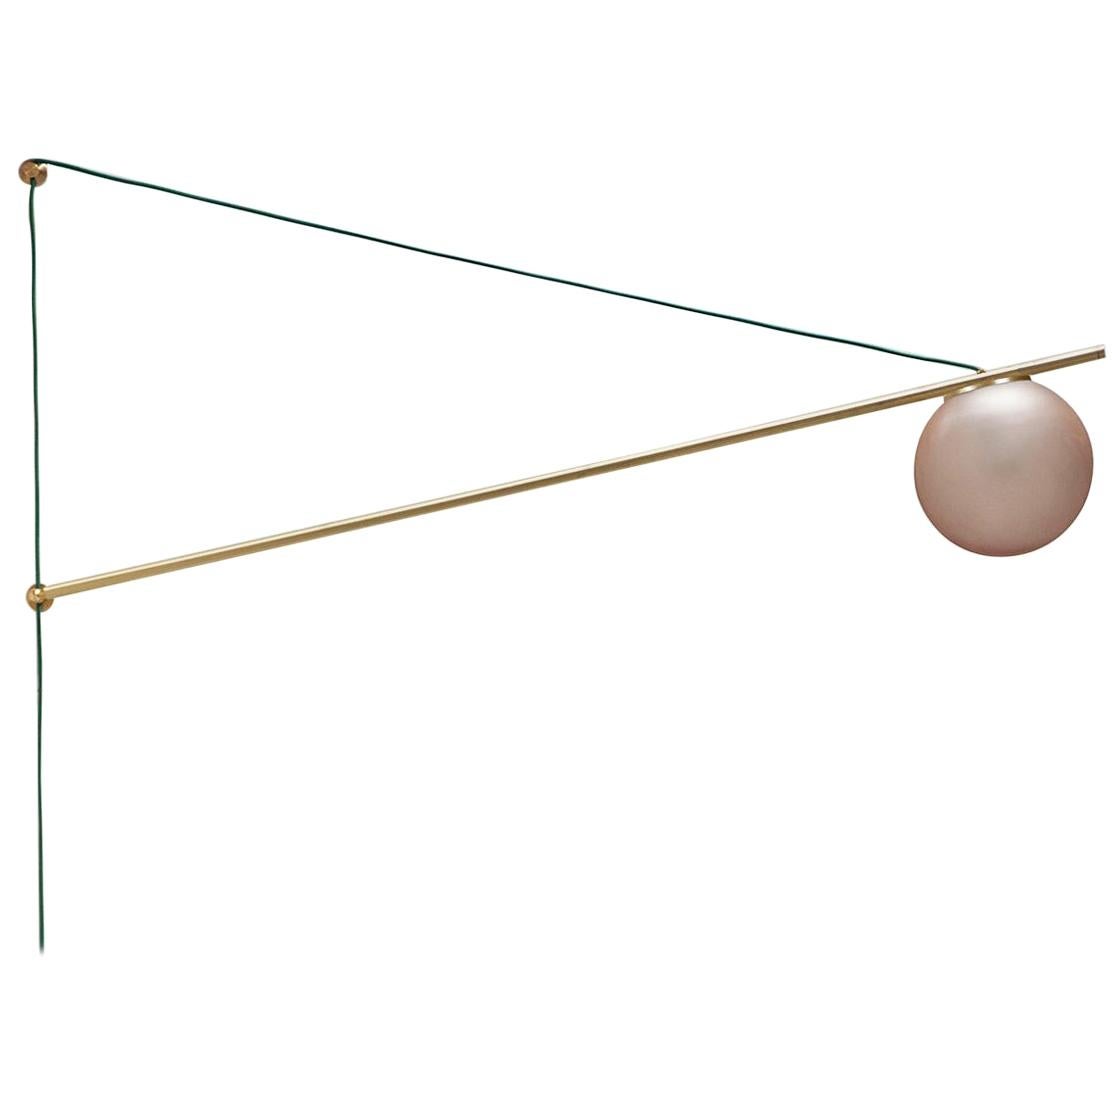 ISO Swing Arm Large Sconce in Messing-Finish & Color Wash Globe Wandmontage Licht im Angebot